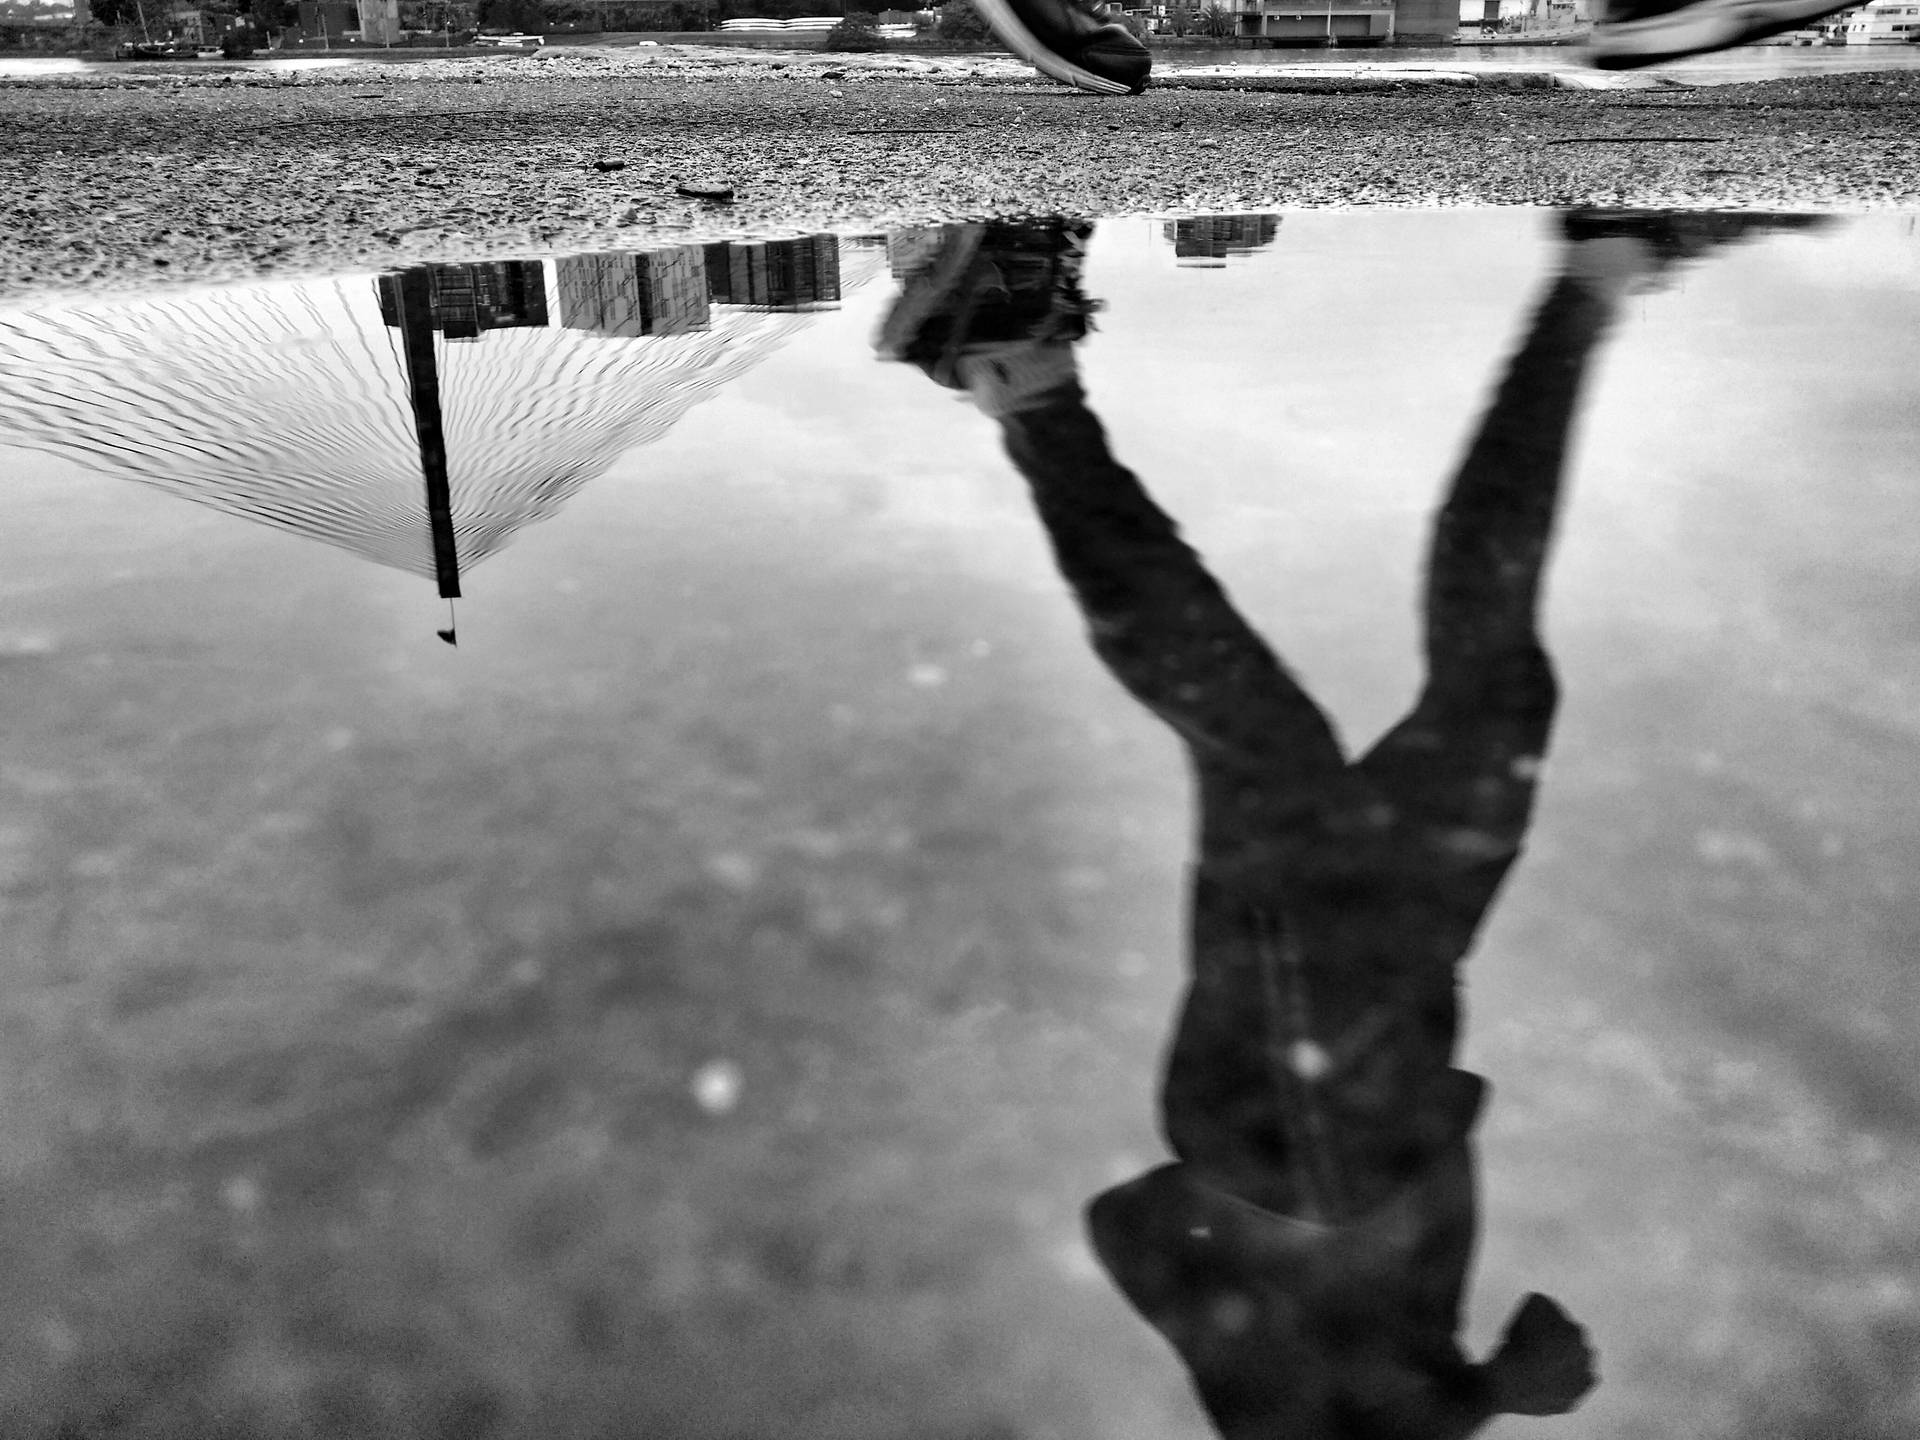 Runner's Reflection On Water